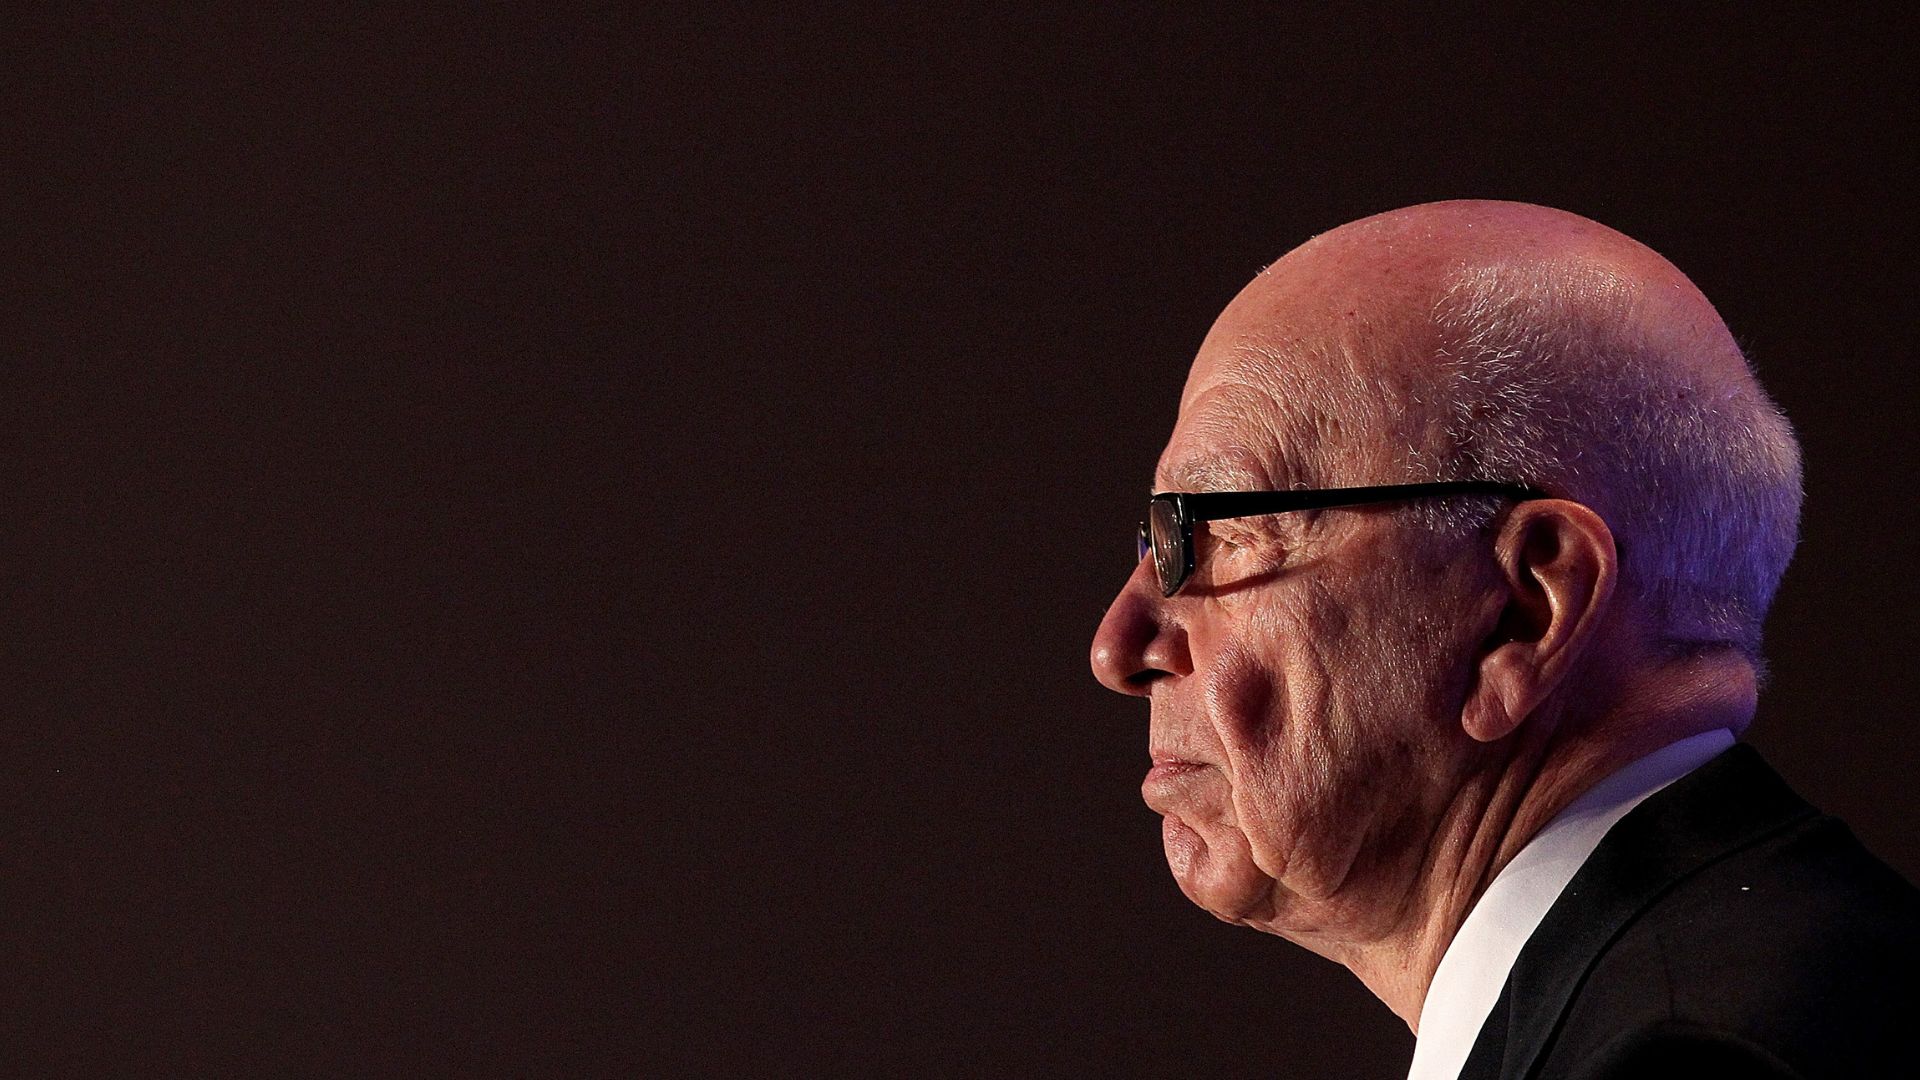 Rupert Murdoch to retire, passing media empire to son Lachlan, reports claim.